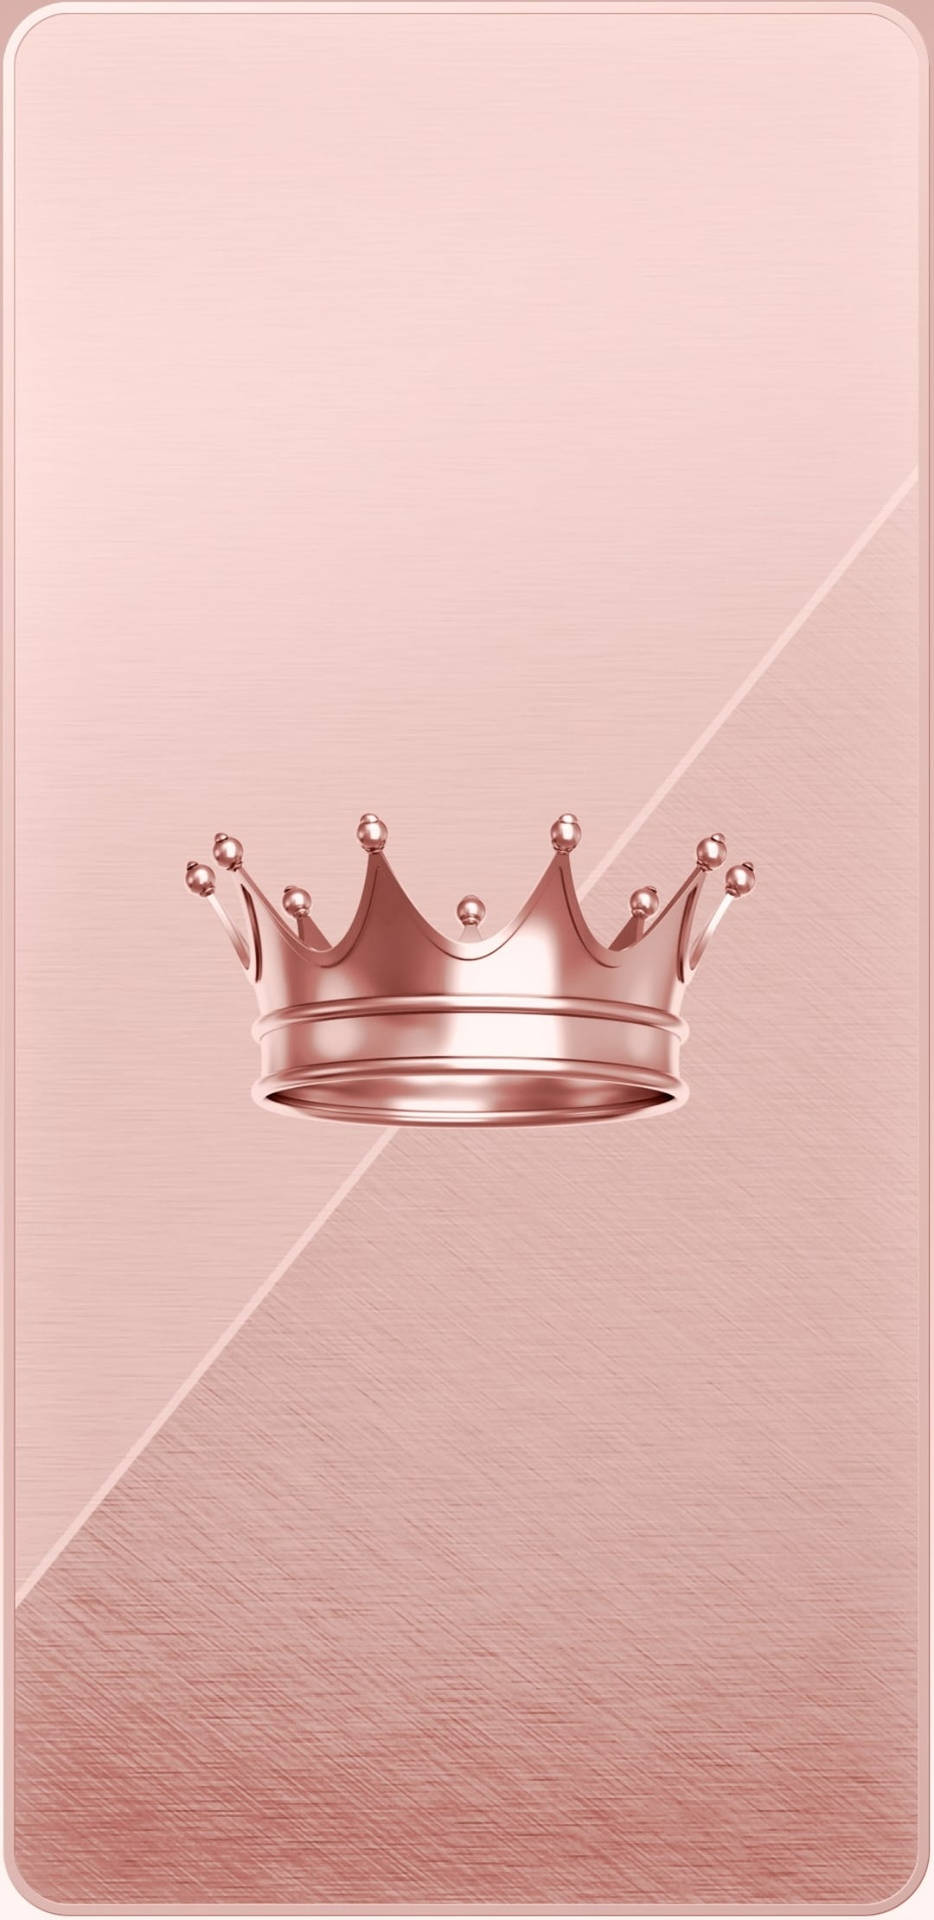 A pink crown icon on an app - 